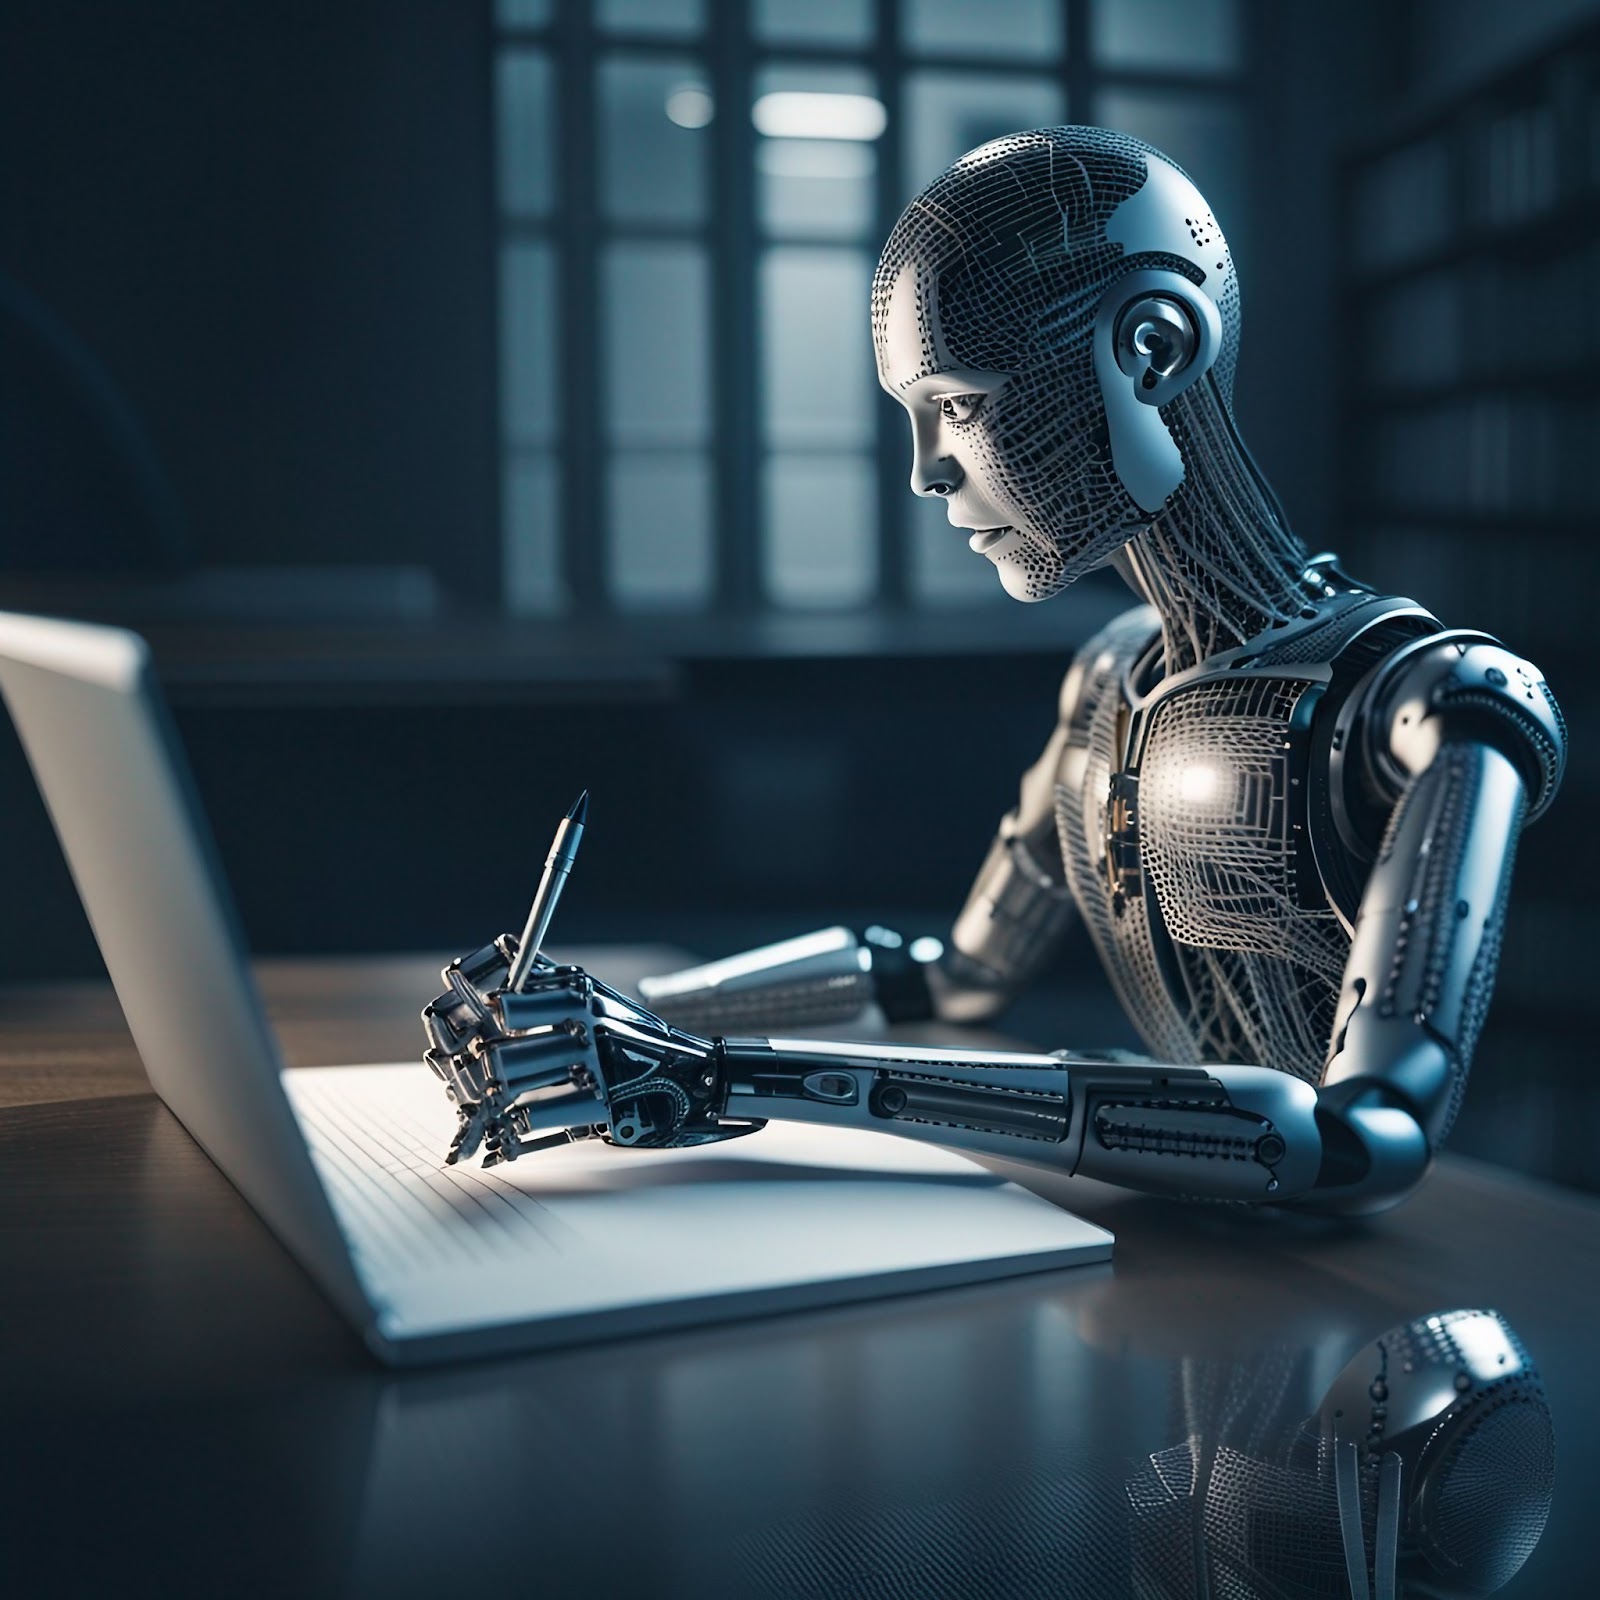 "Explore the intersection of artificial intelligence and the human art of writing. Are AI machines a threat, or could they potentially enhance our writing skills? Let's dissect this modern conundrum."